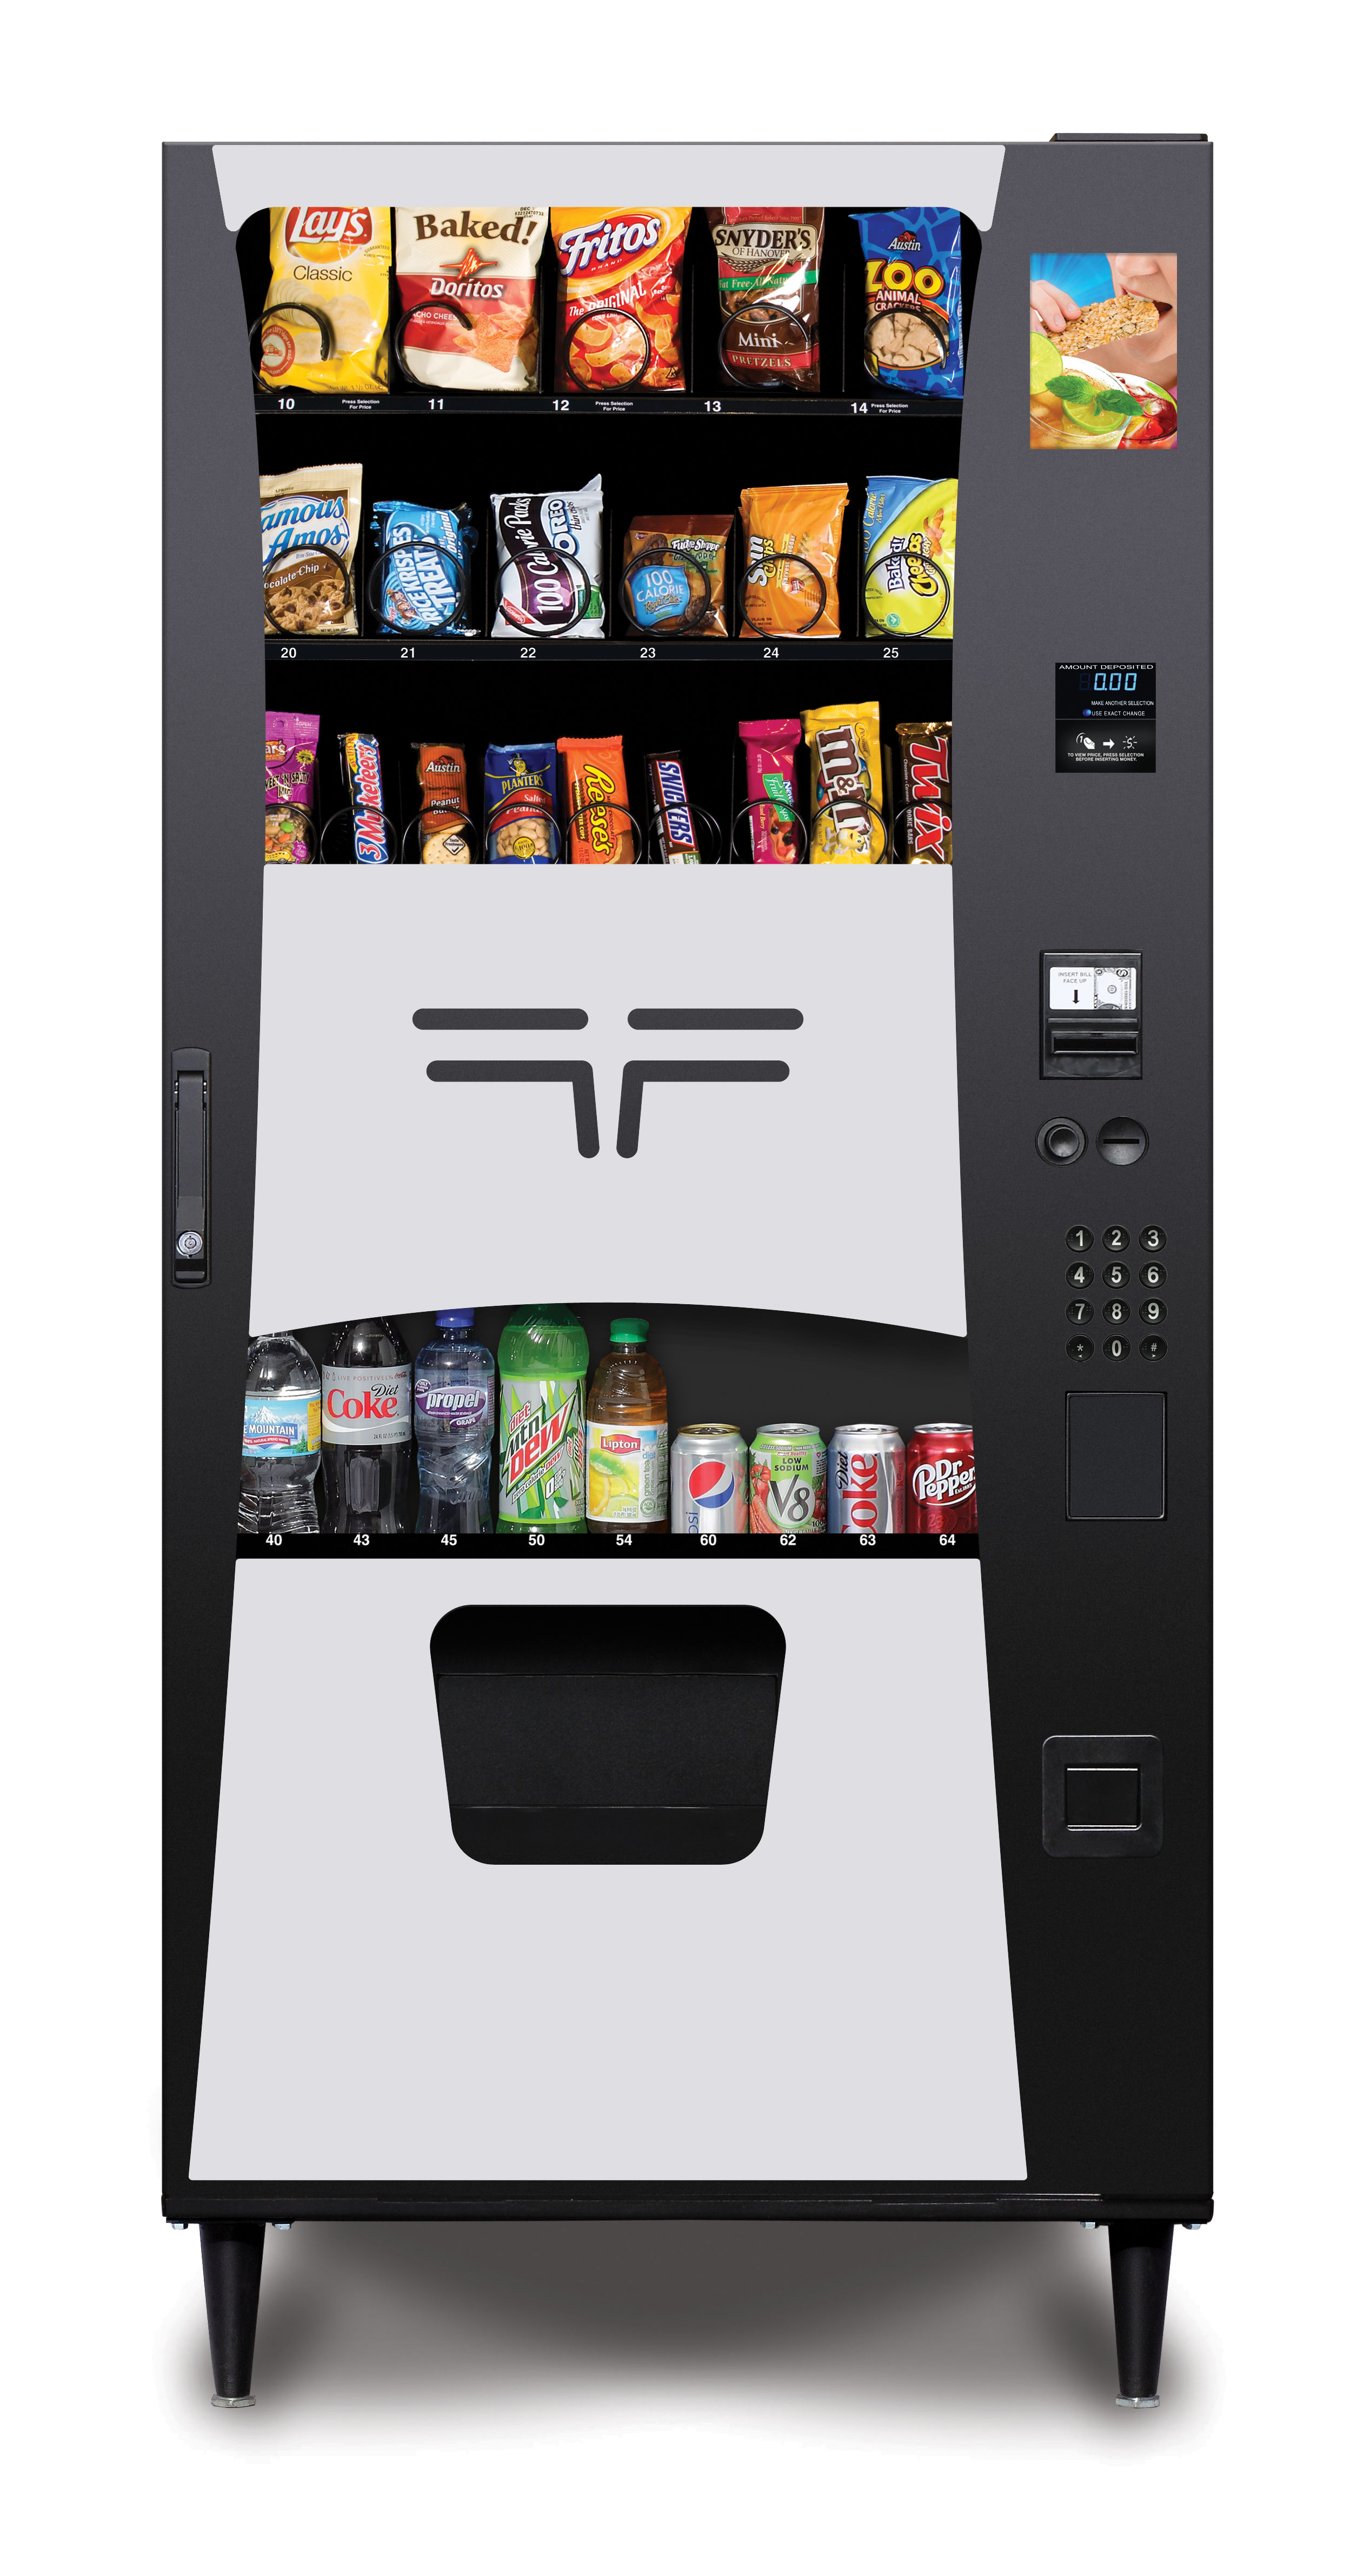 The 29 Selection Combo Vending Machine is the perfect vending machine for any location.